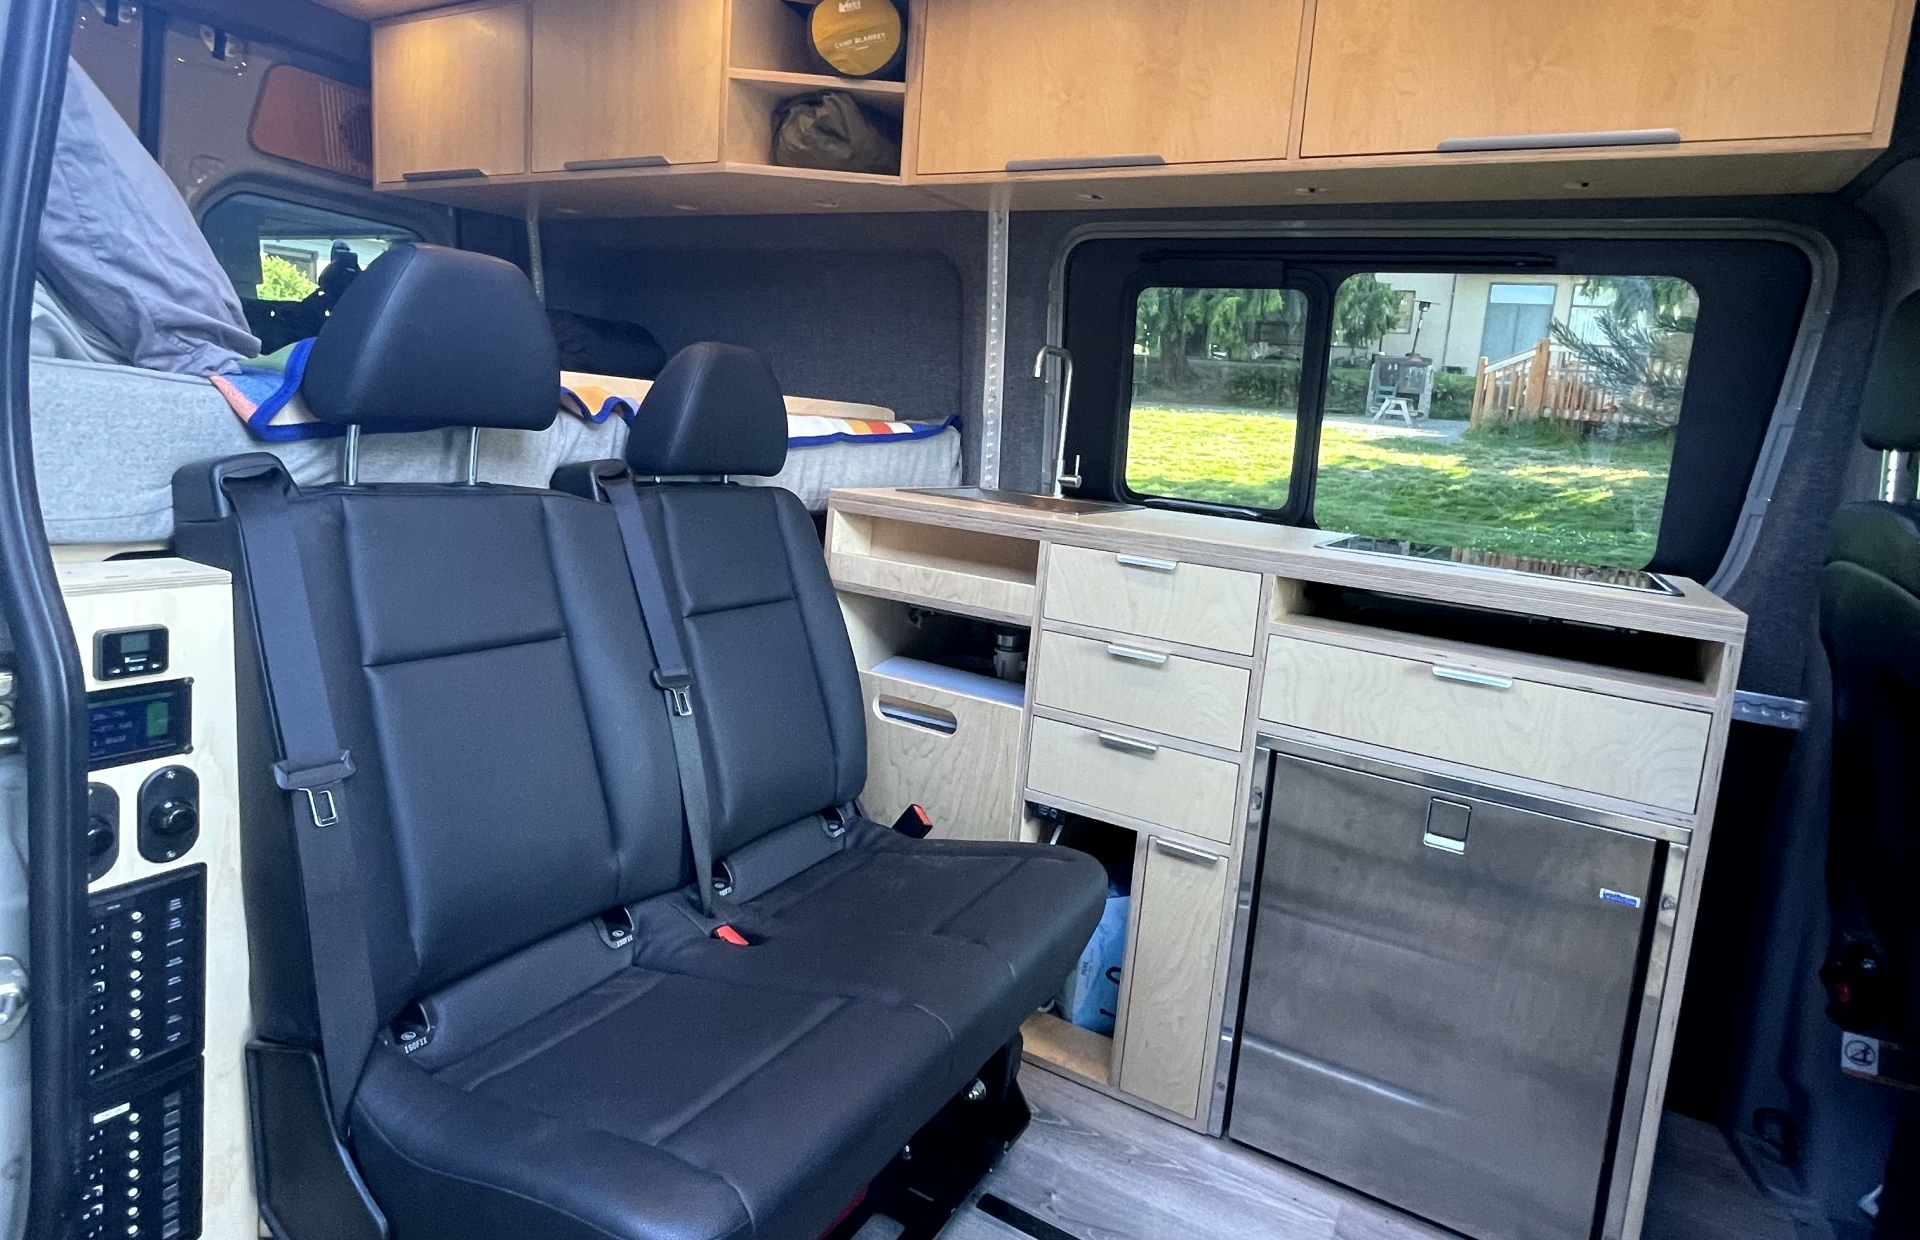 image of the interior of the van showing the modified seat, custom cabinetry, refrigerator and lighting